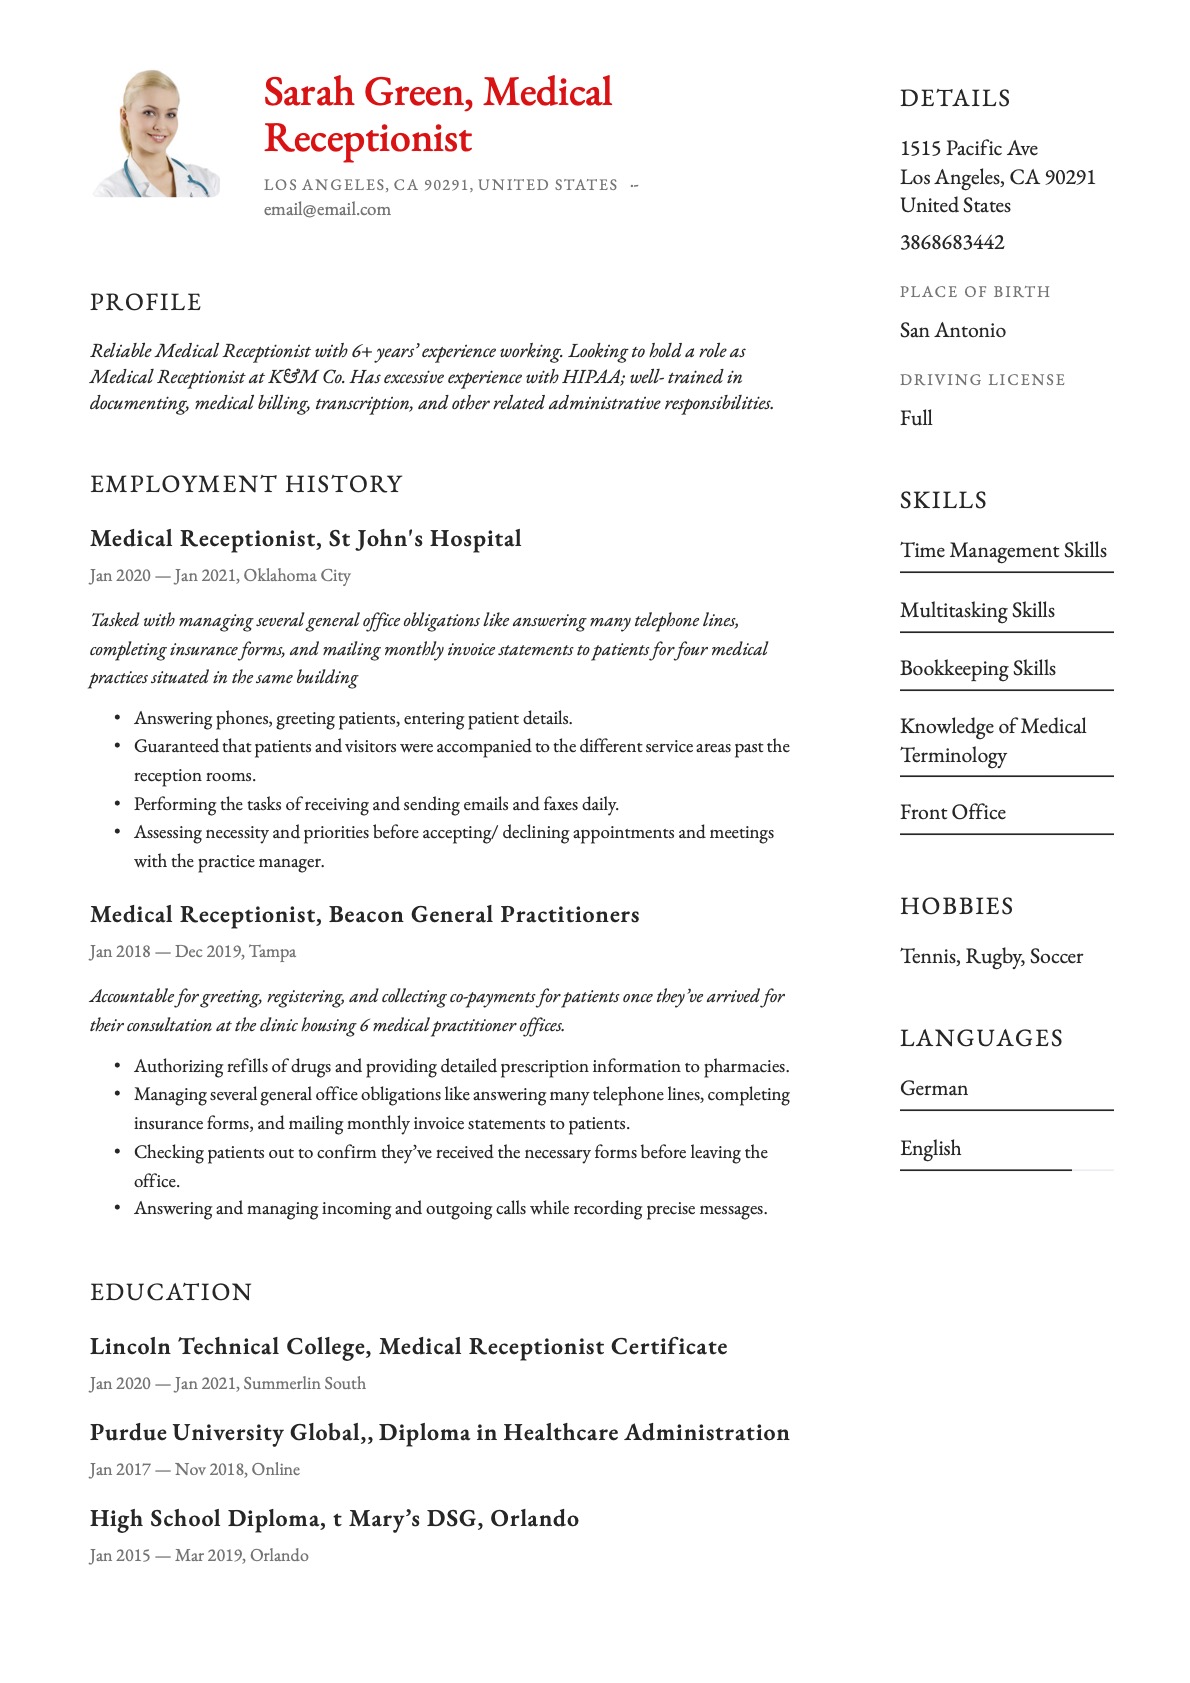 Example Resume Medical Receptionist-13